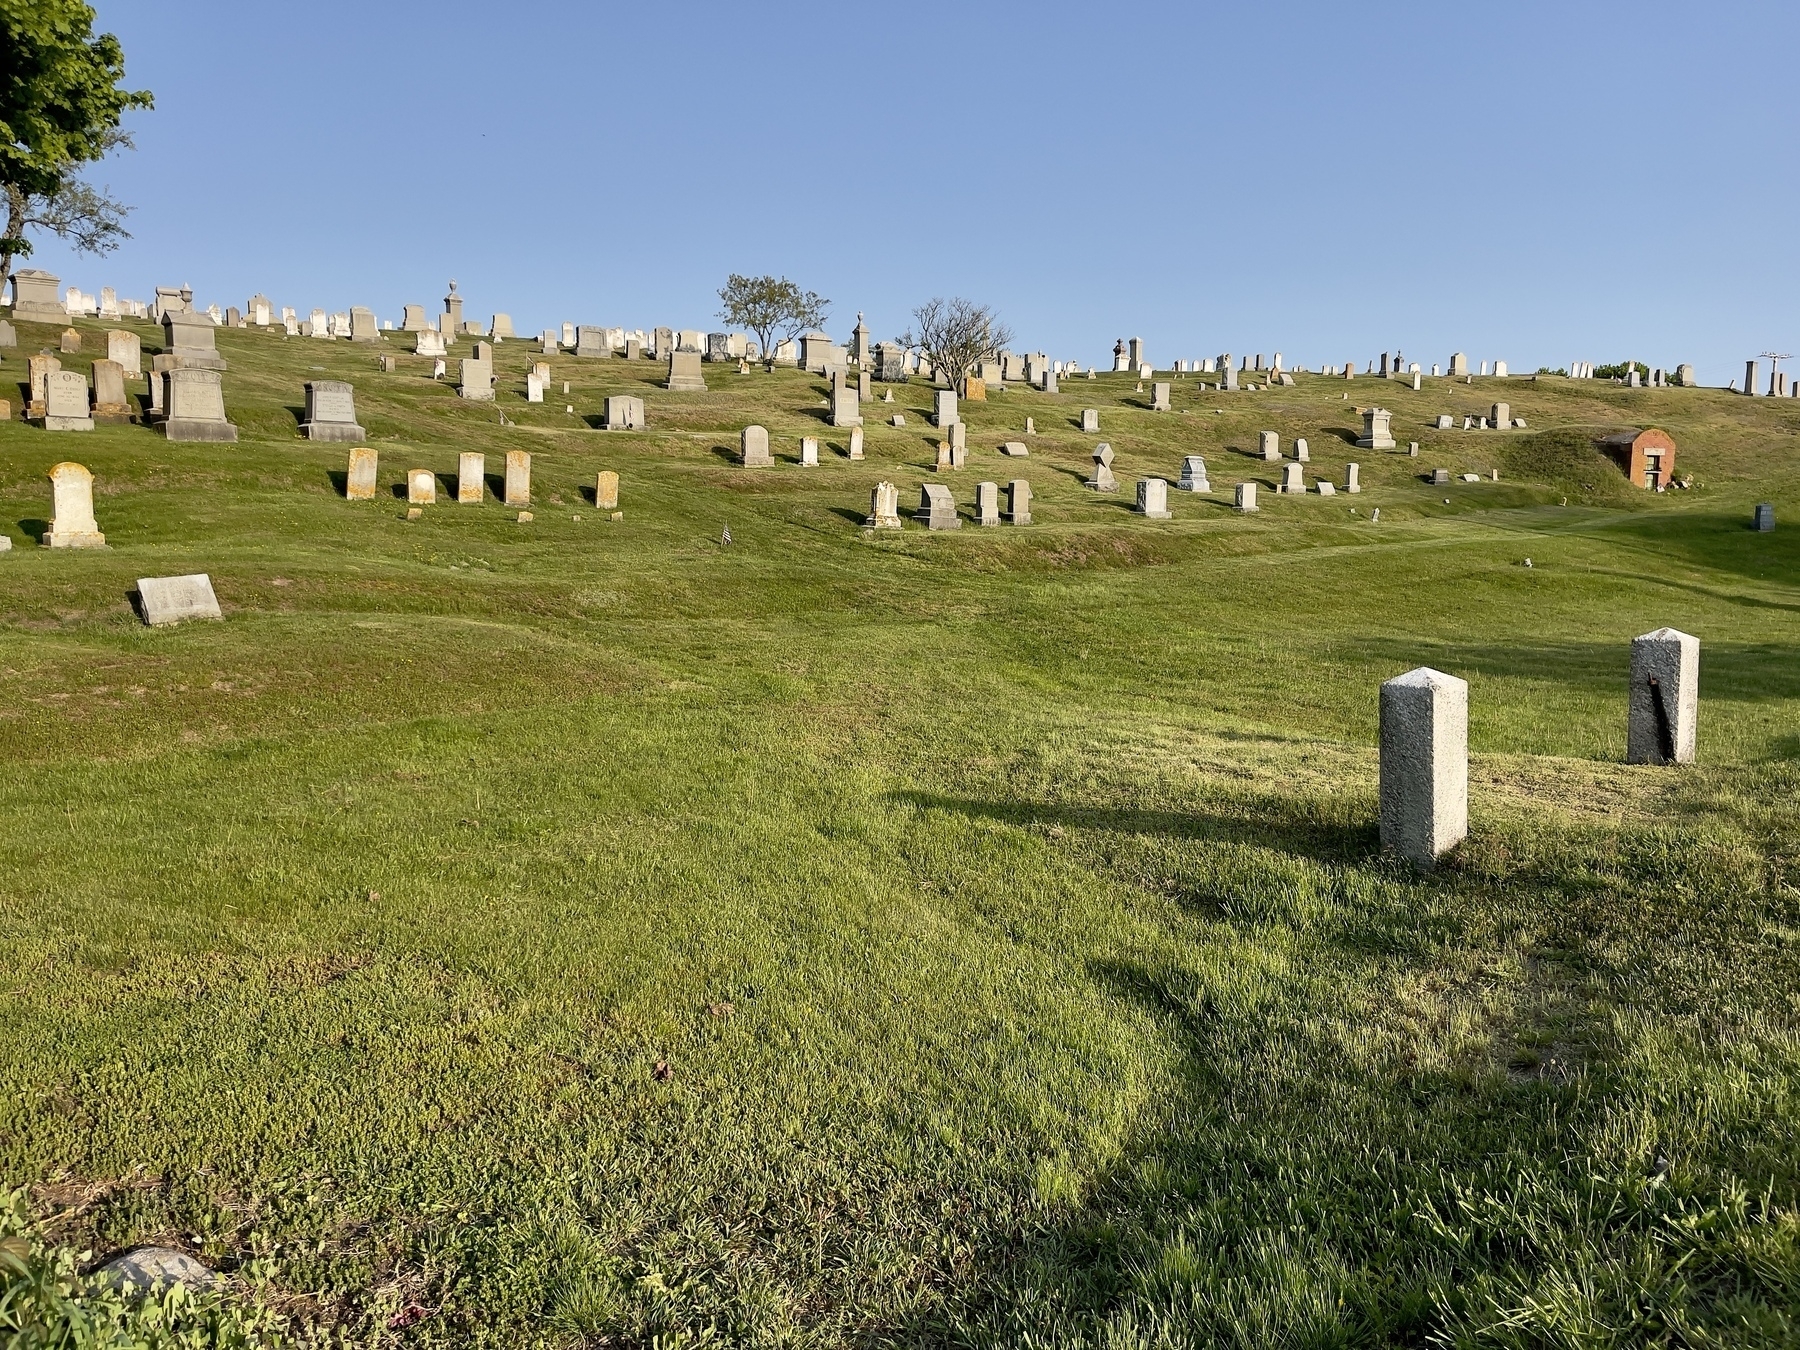 Tombstones on a hill in early morning sun. 